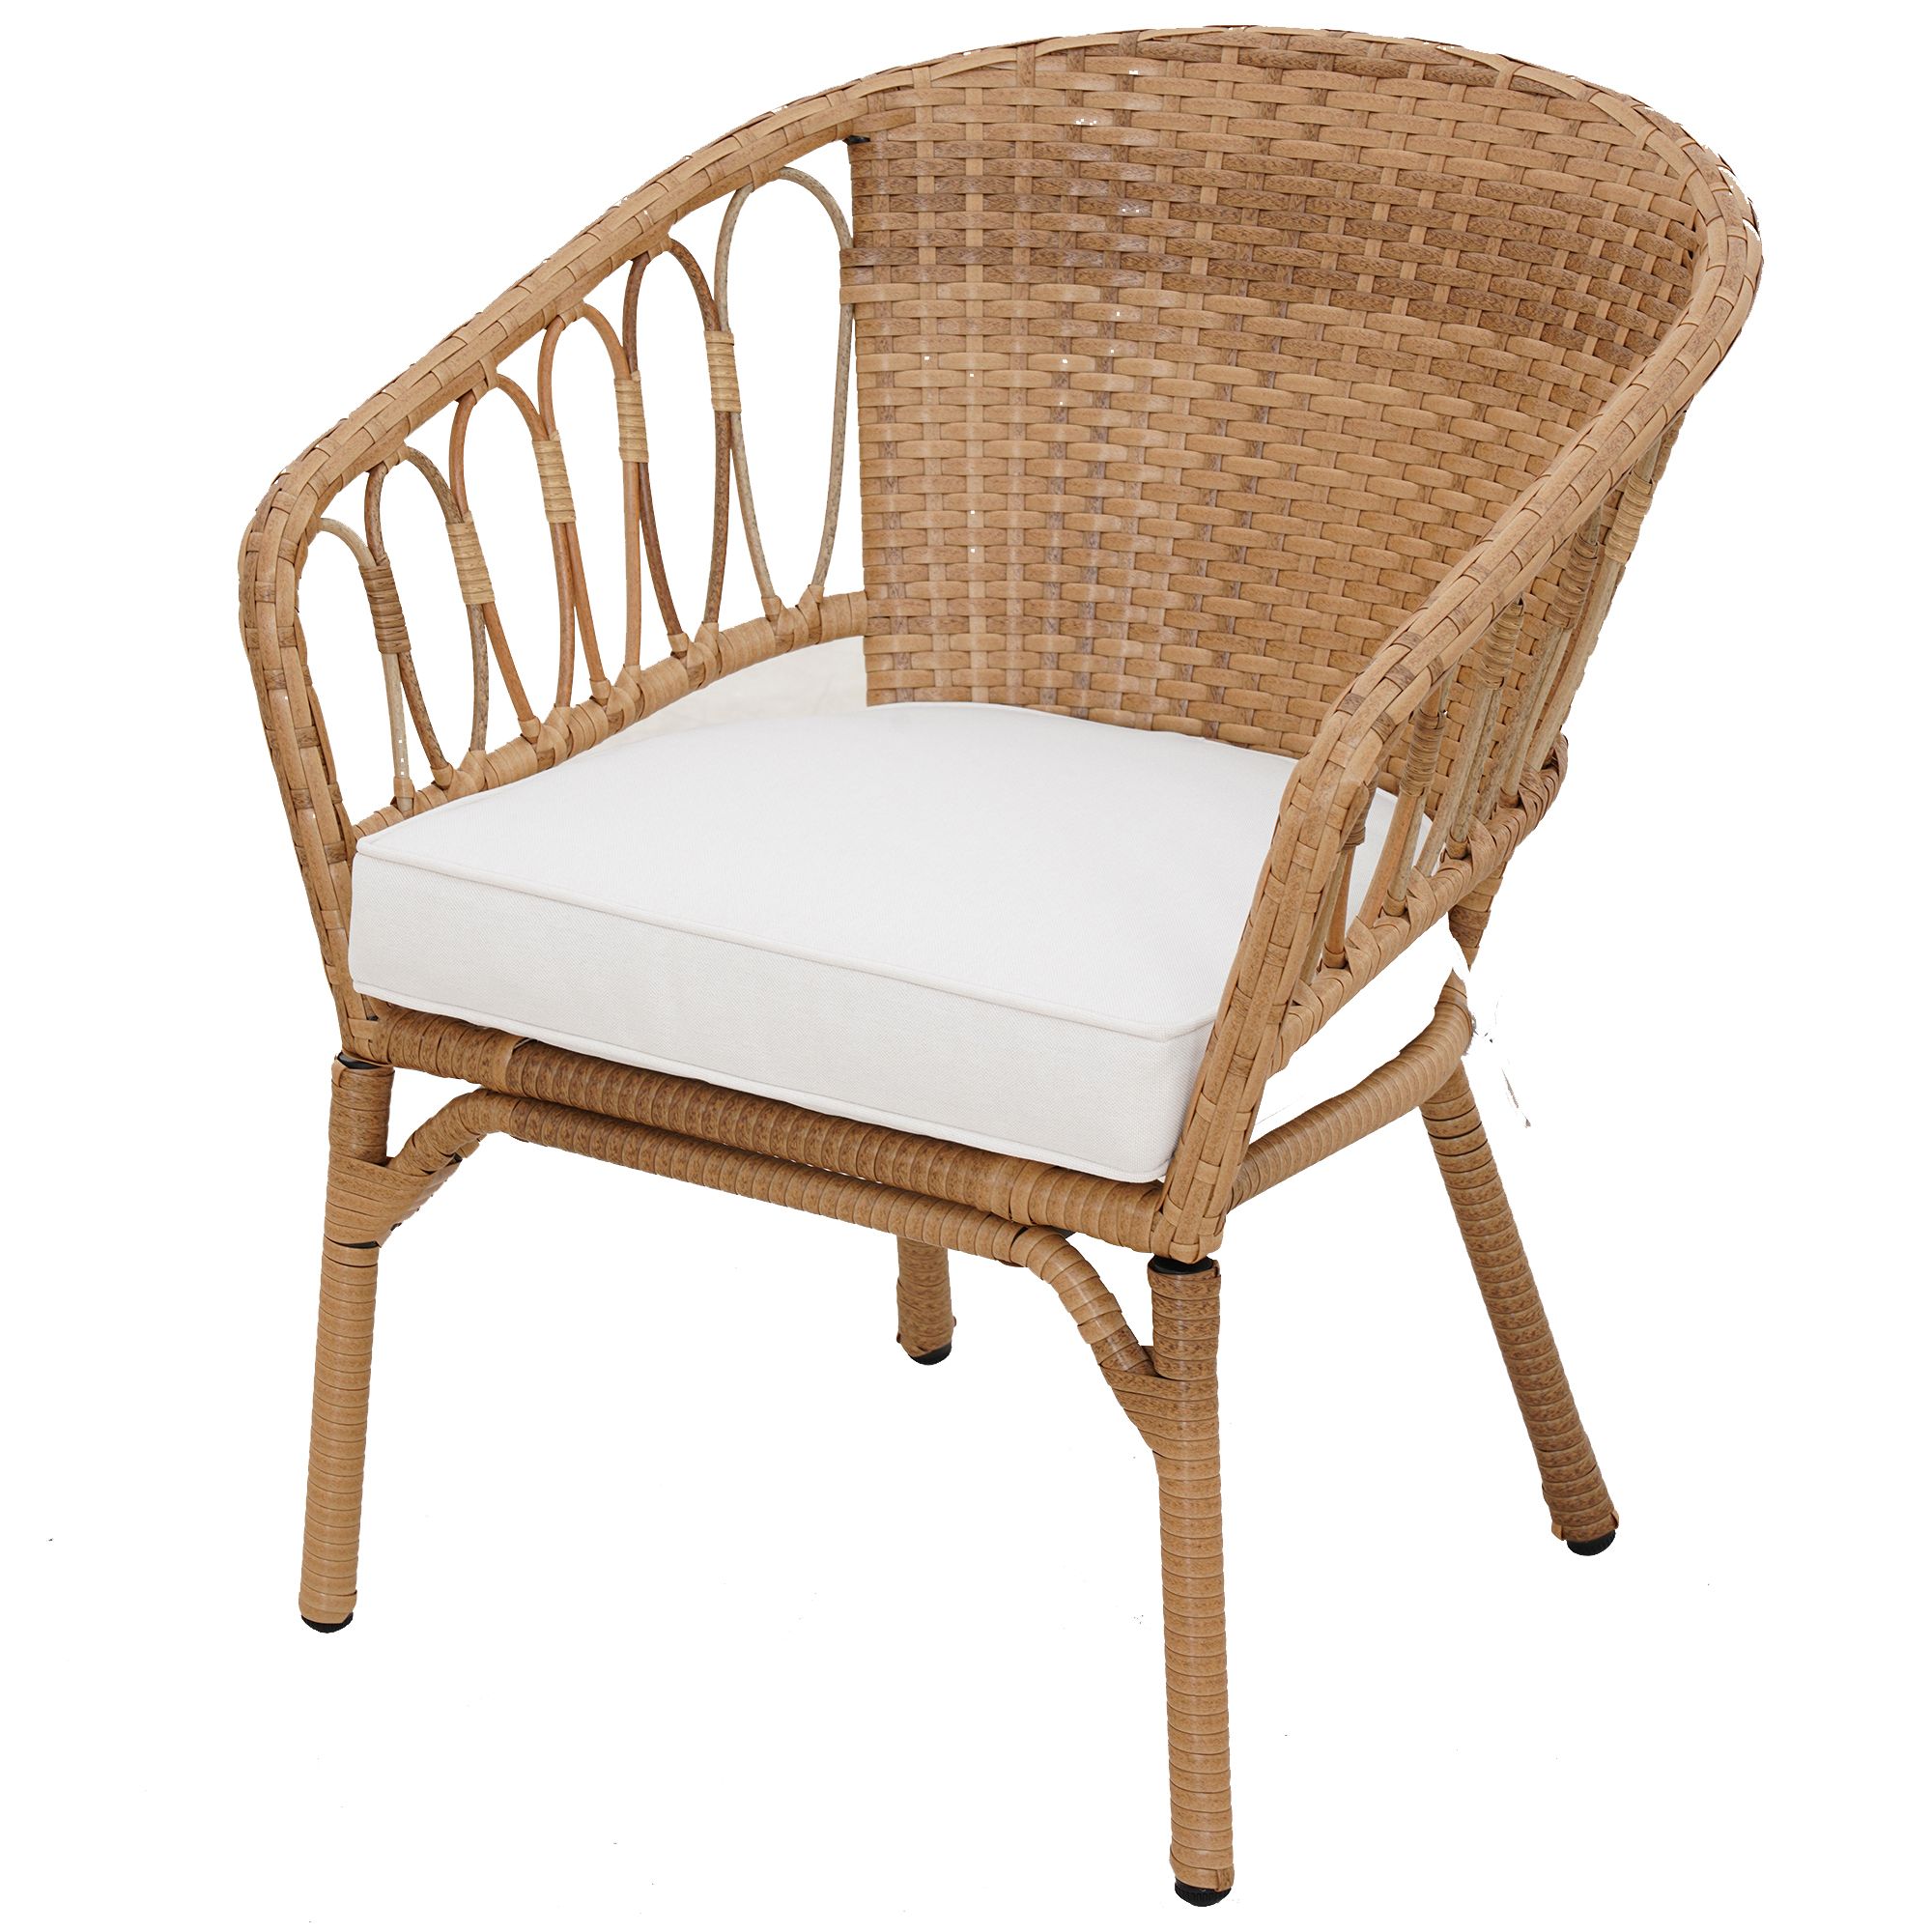 Better Homes & Gardens Willow Sage 3-Piece Bistro Set with Wicker Table, Beige - image 3 of 7